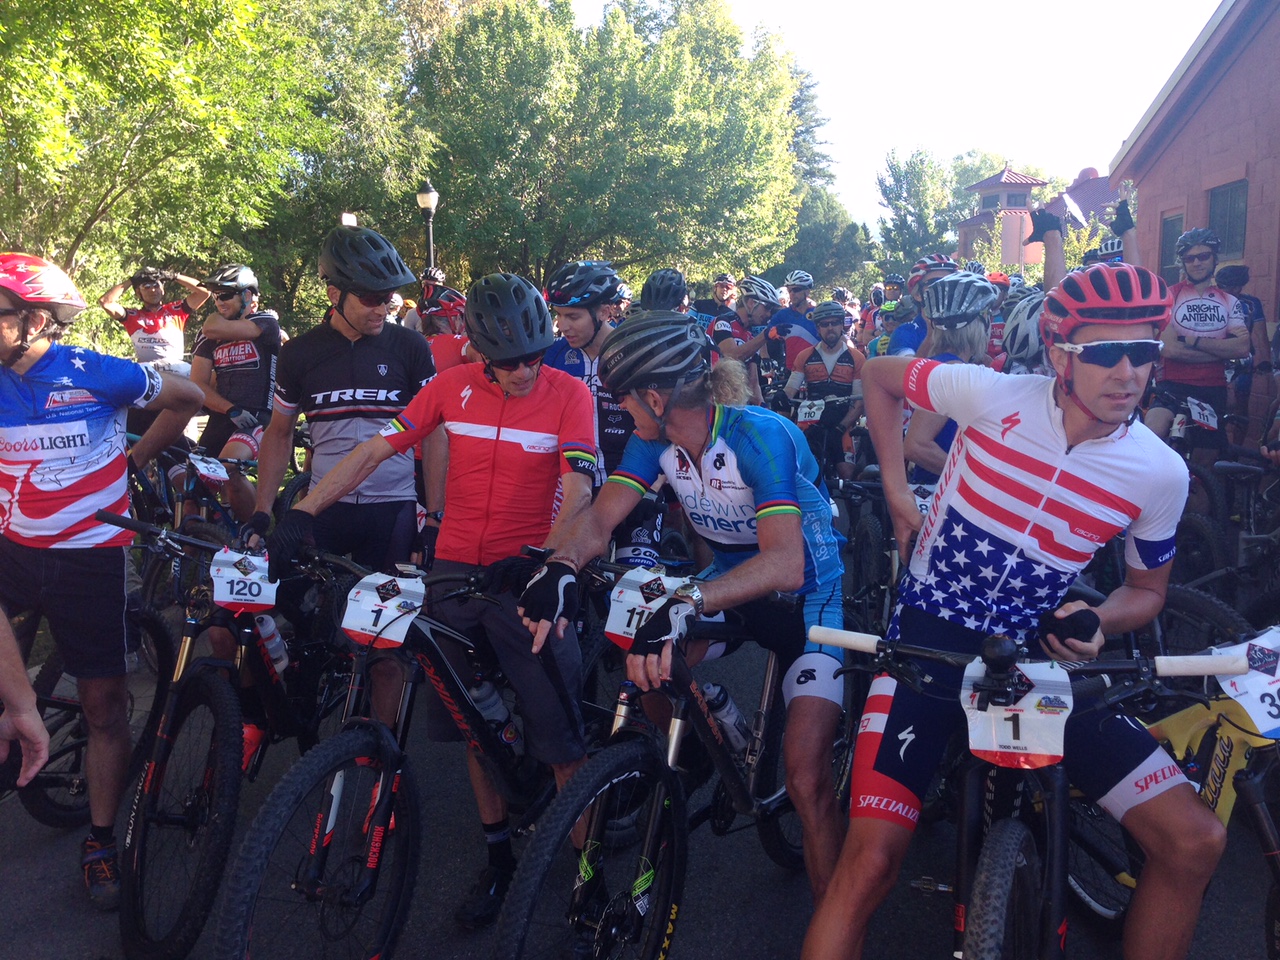 Talking to Ned at the start. Todd is next to me wearing his National Championship jersey.